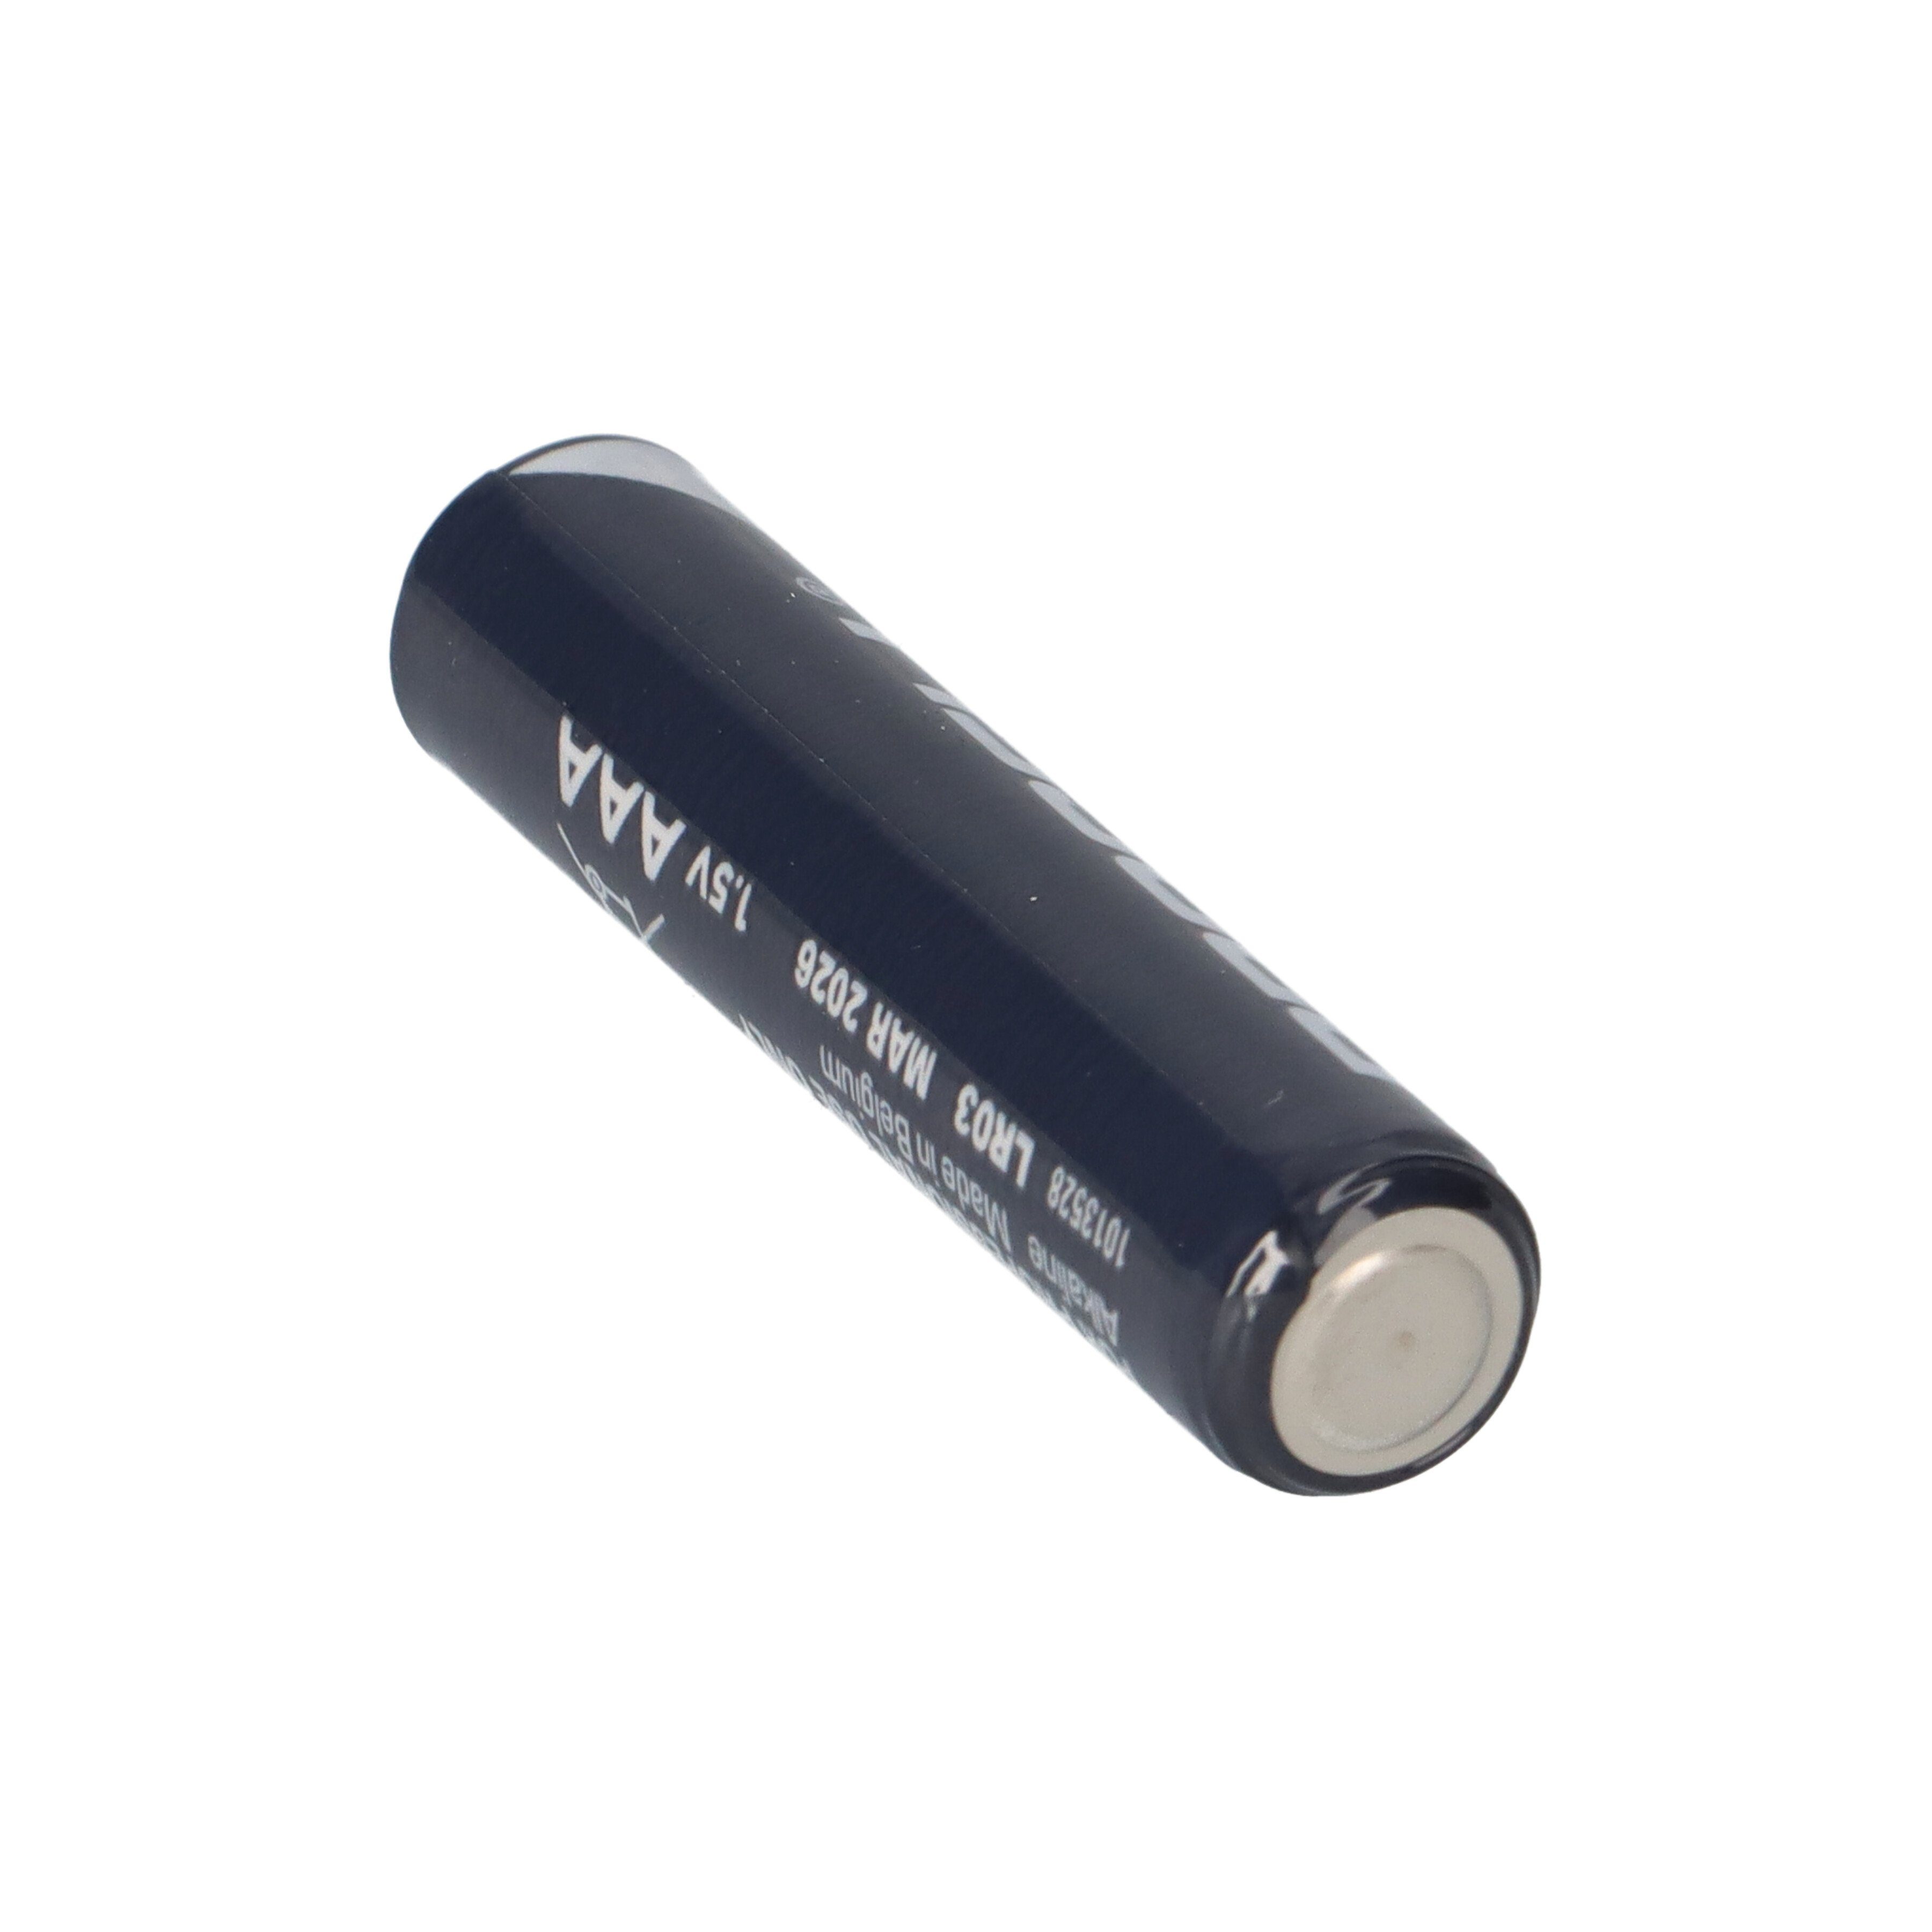 Batterie MN2400 Batterie Micro Duracell AAA Procell Duracell 10x